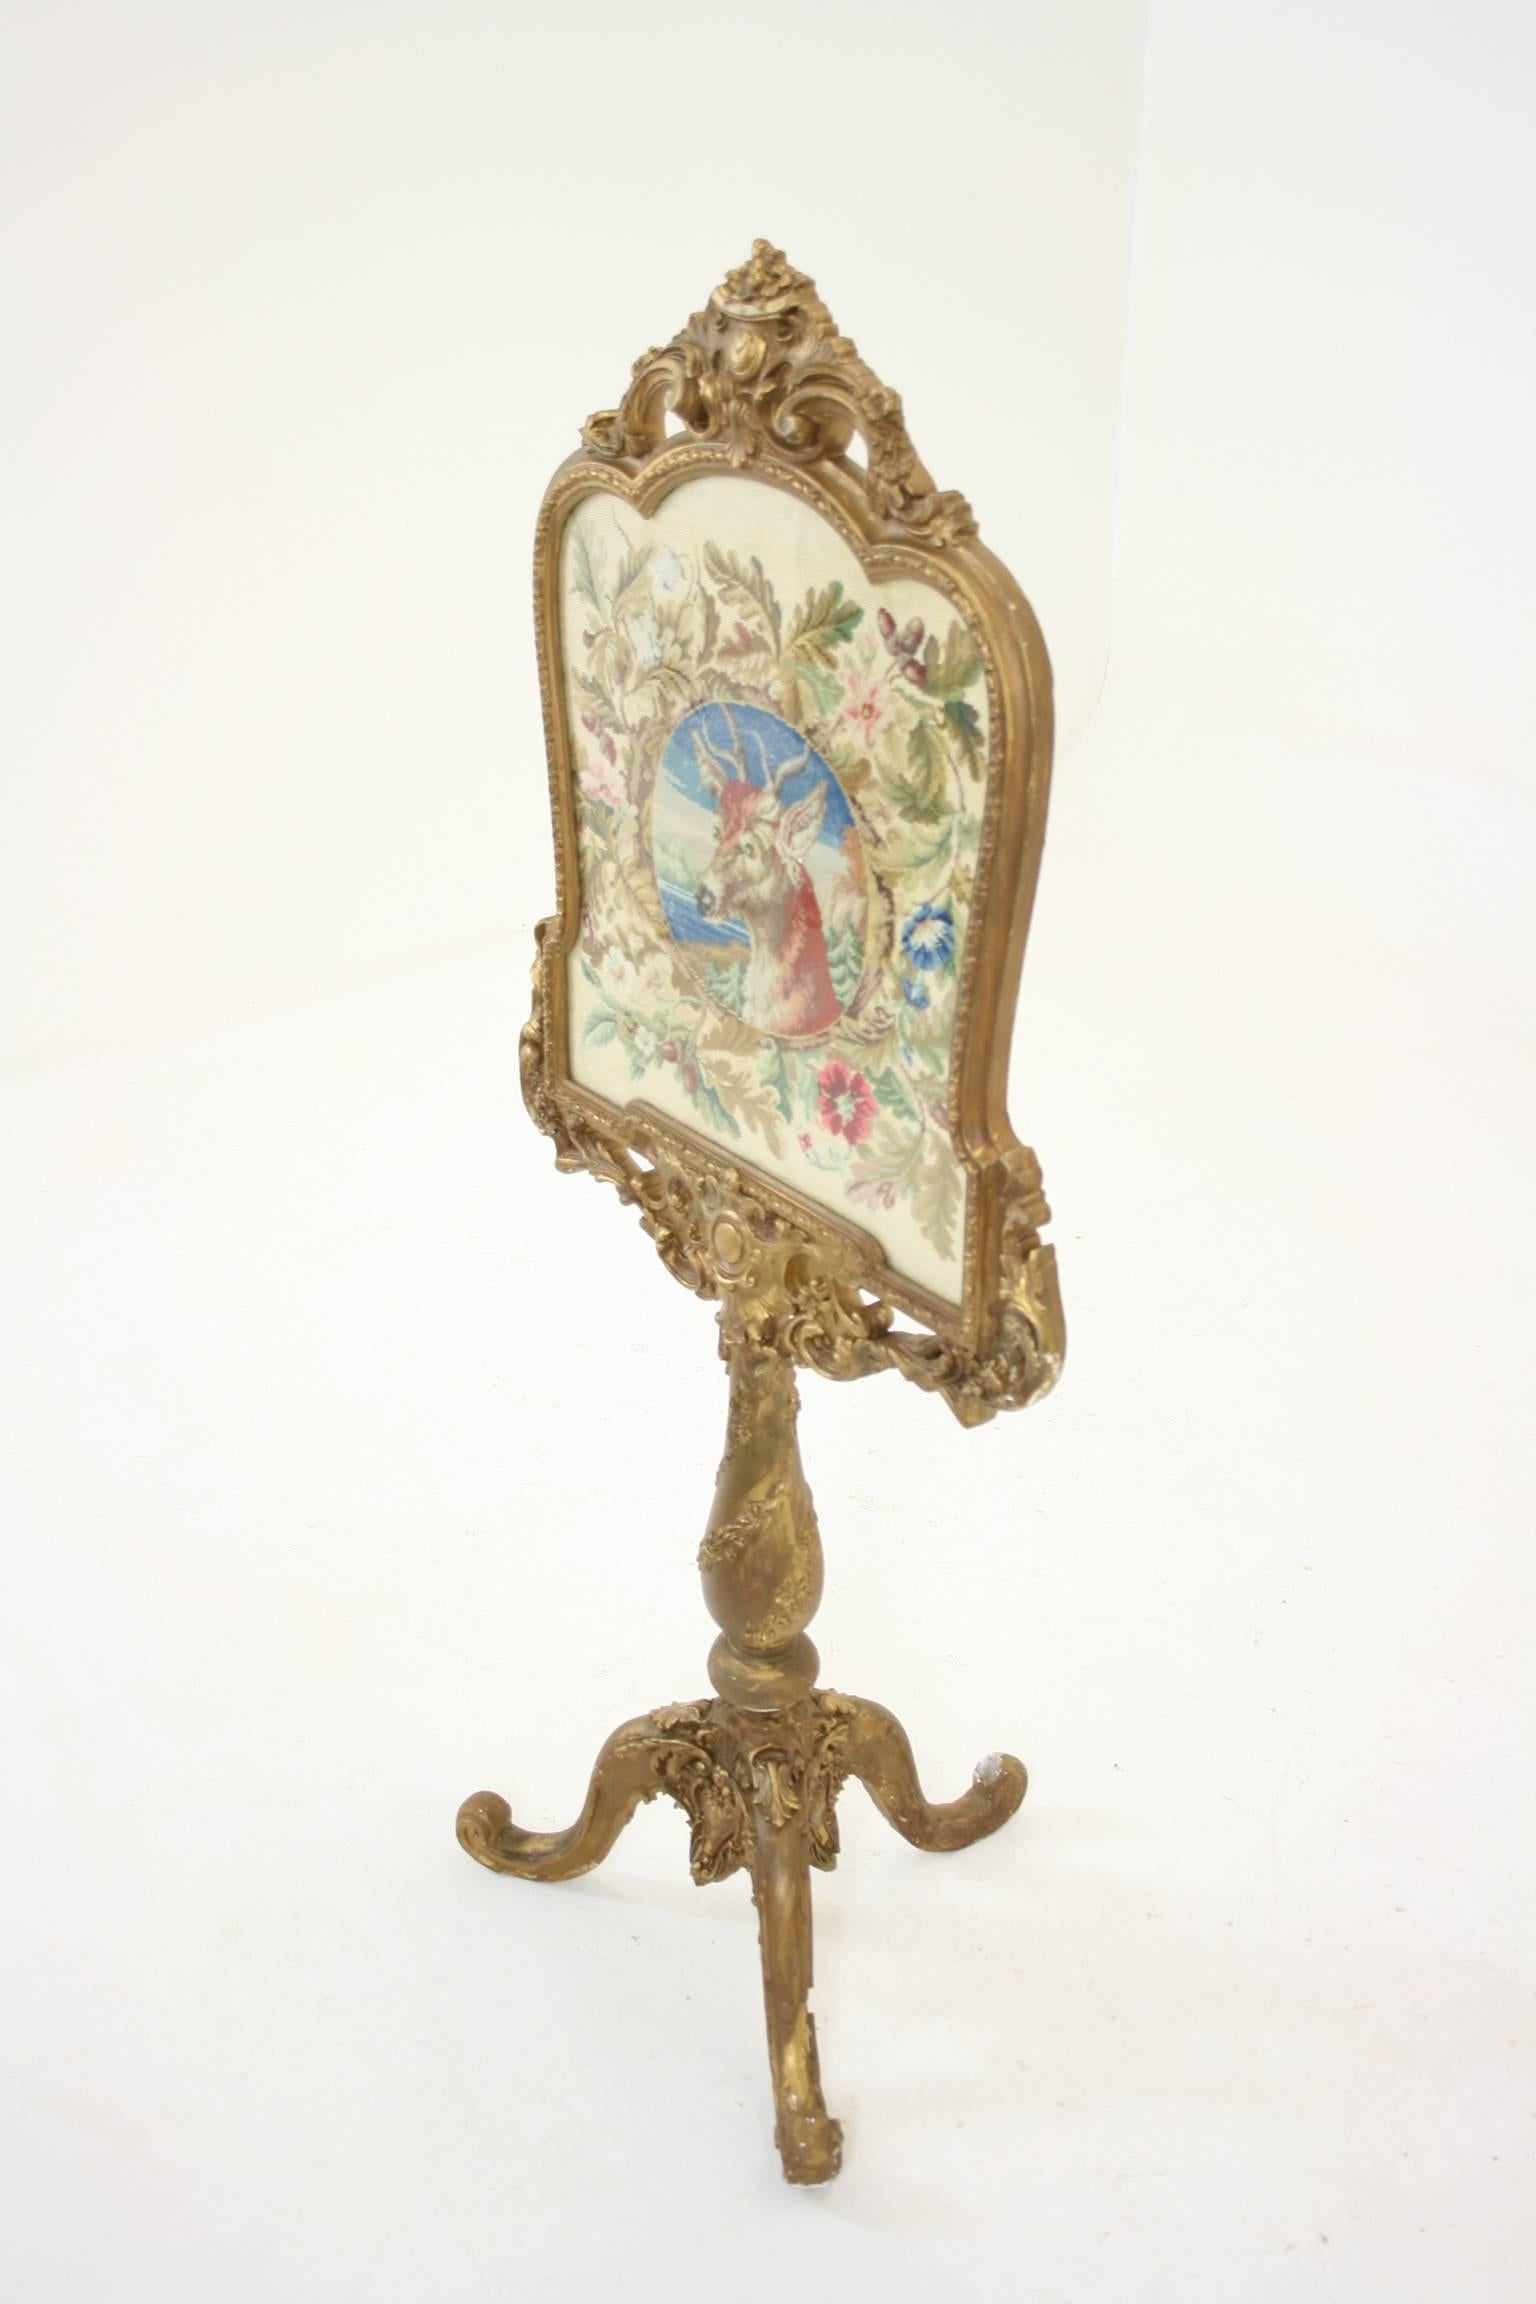 - $950
 - Scotland, 1840
 - Glass-front frame
 - Elk in a floral scene
 - Pierced centre shield
 - Original needlepoint
 - Sits on elaborate tripod base
 - Somme loss of plaster of Paris
 - 27″w x 17″d x 58″h
 - Item # C2362
 - Shipping